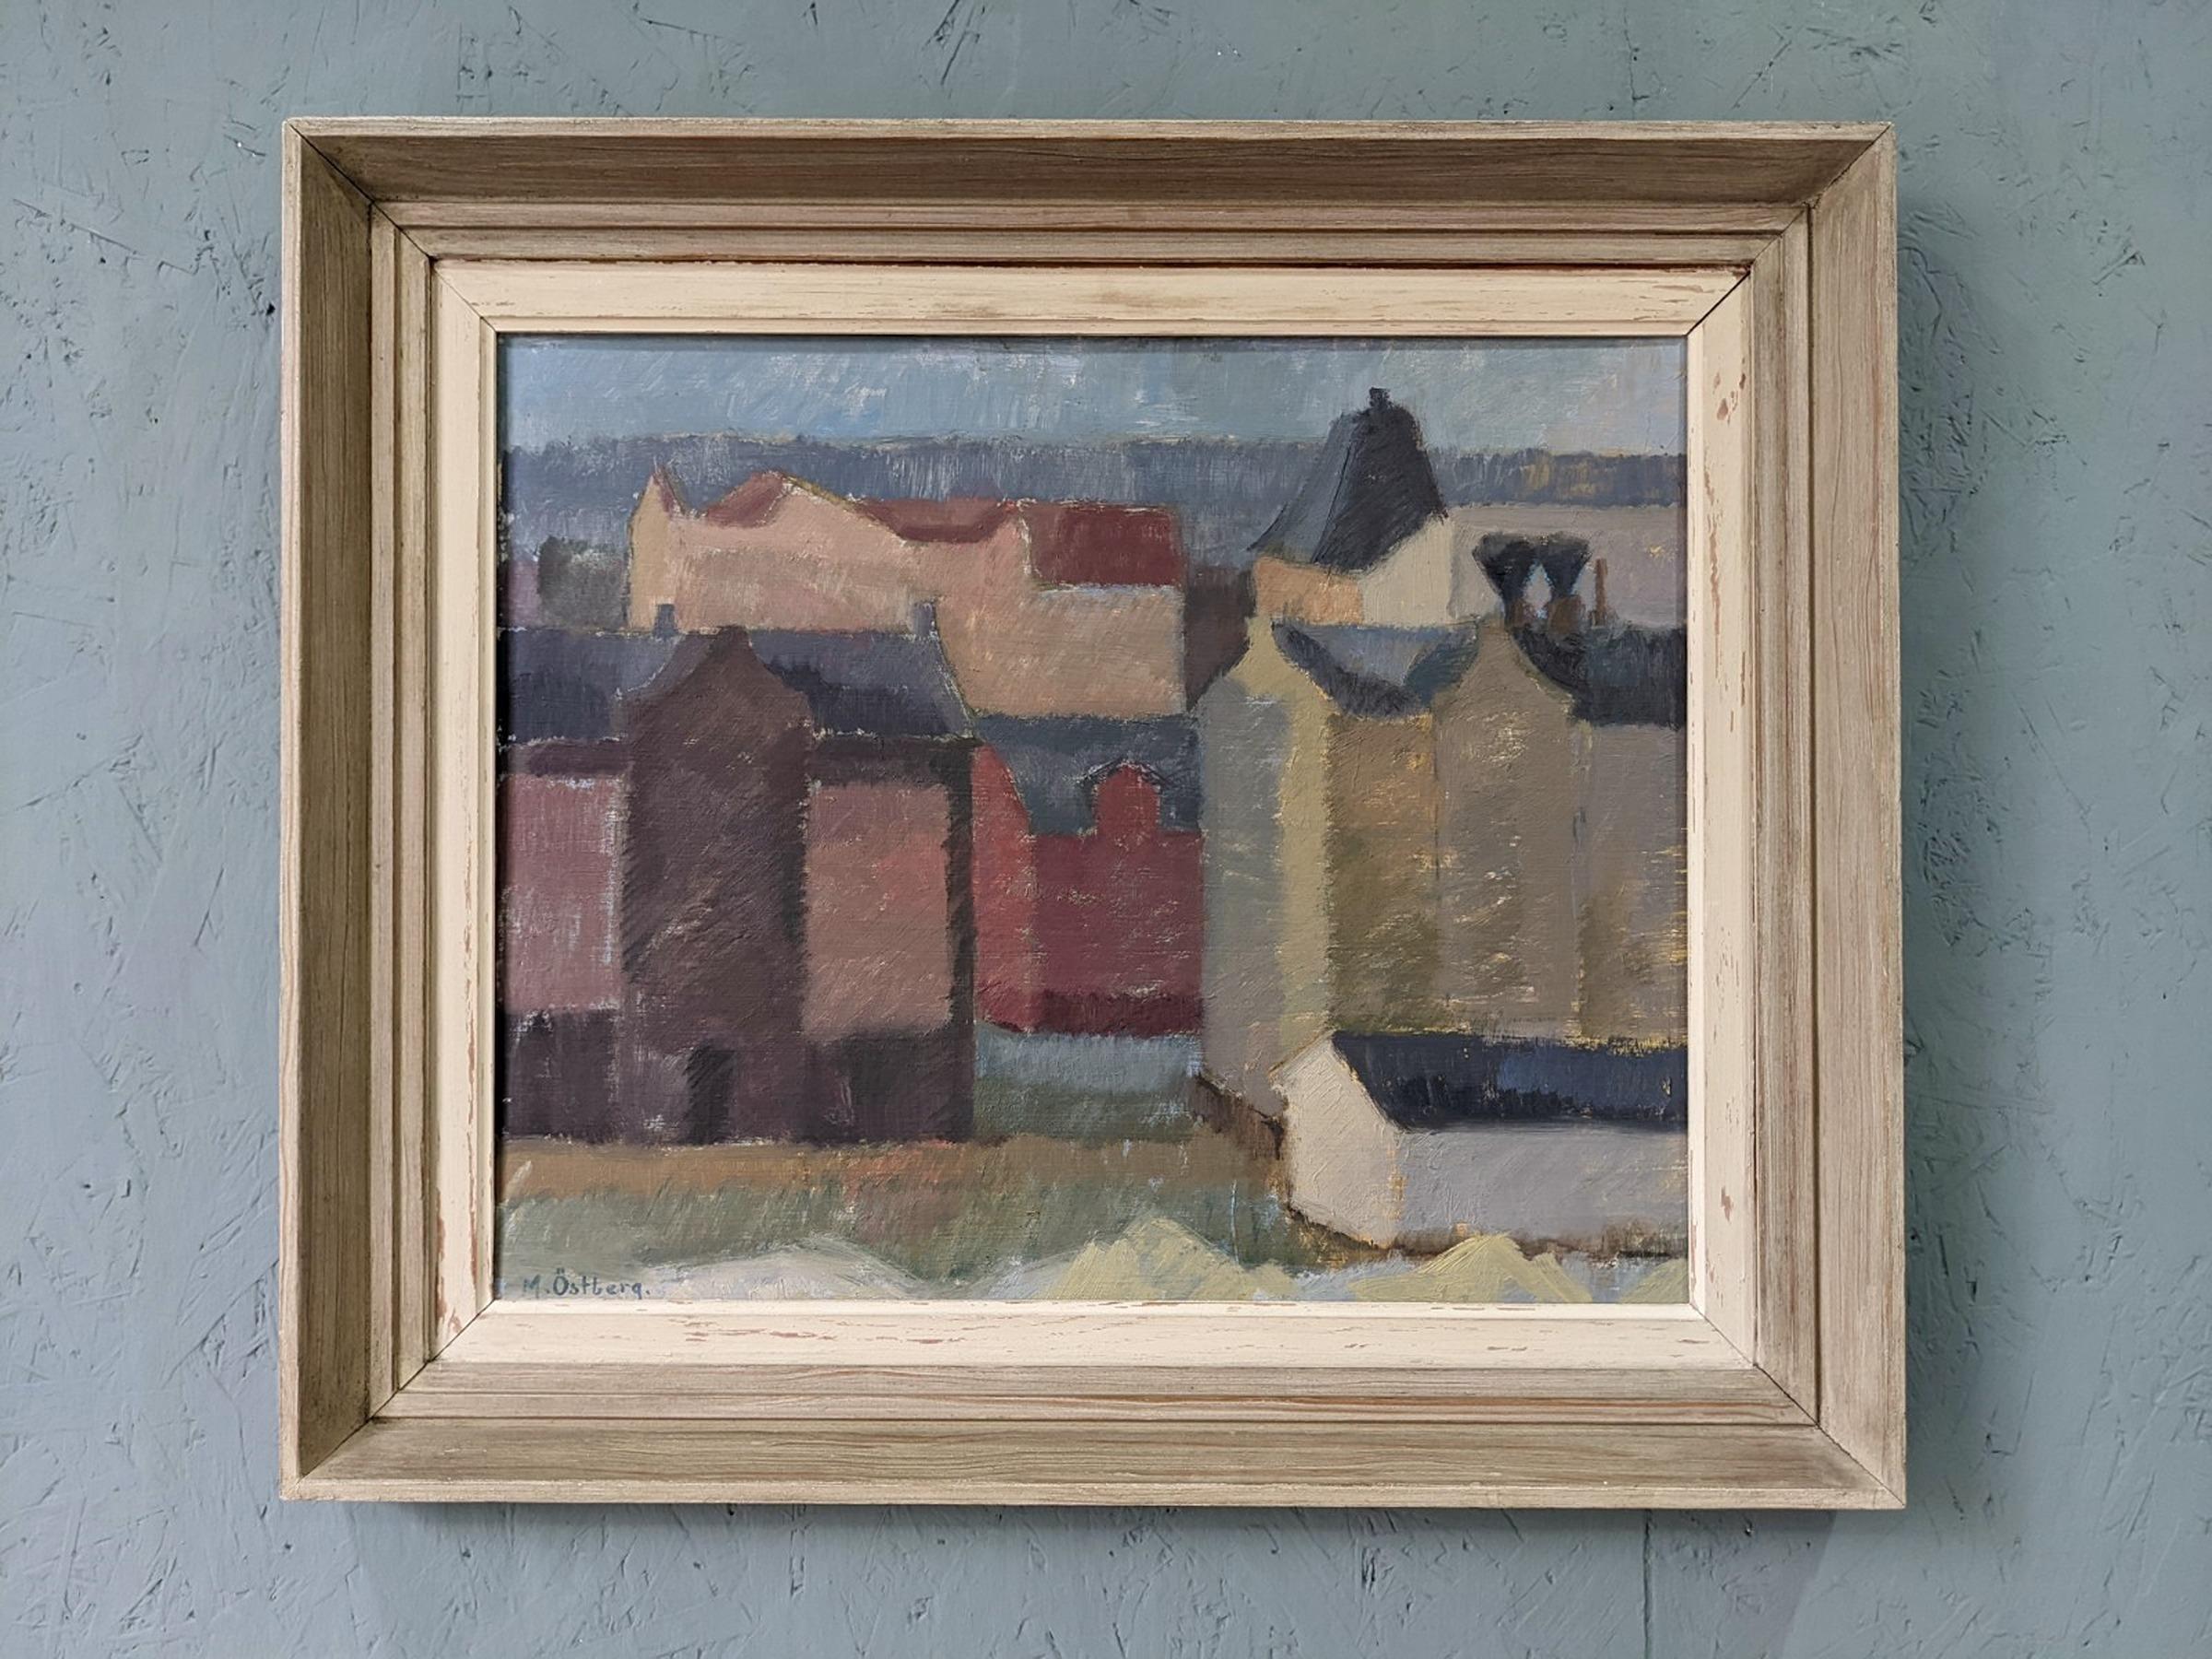 FACADES
Size; 50 x 58 cm (including frame)
Oil on Board

A poignant and beautifully executed mid century modernist cityscape composition, painted in oil onto board.

Presenting a row of coloured buildings, the artist has skilfully reconstructed this